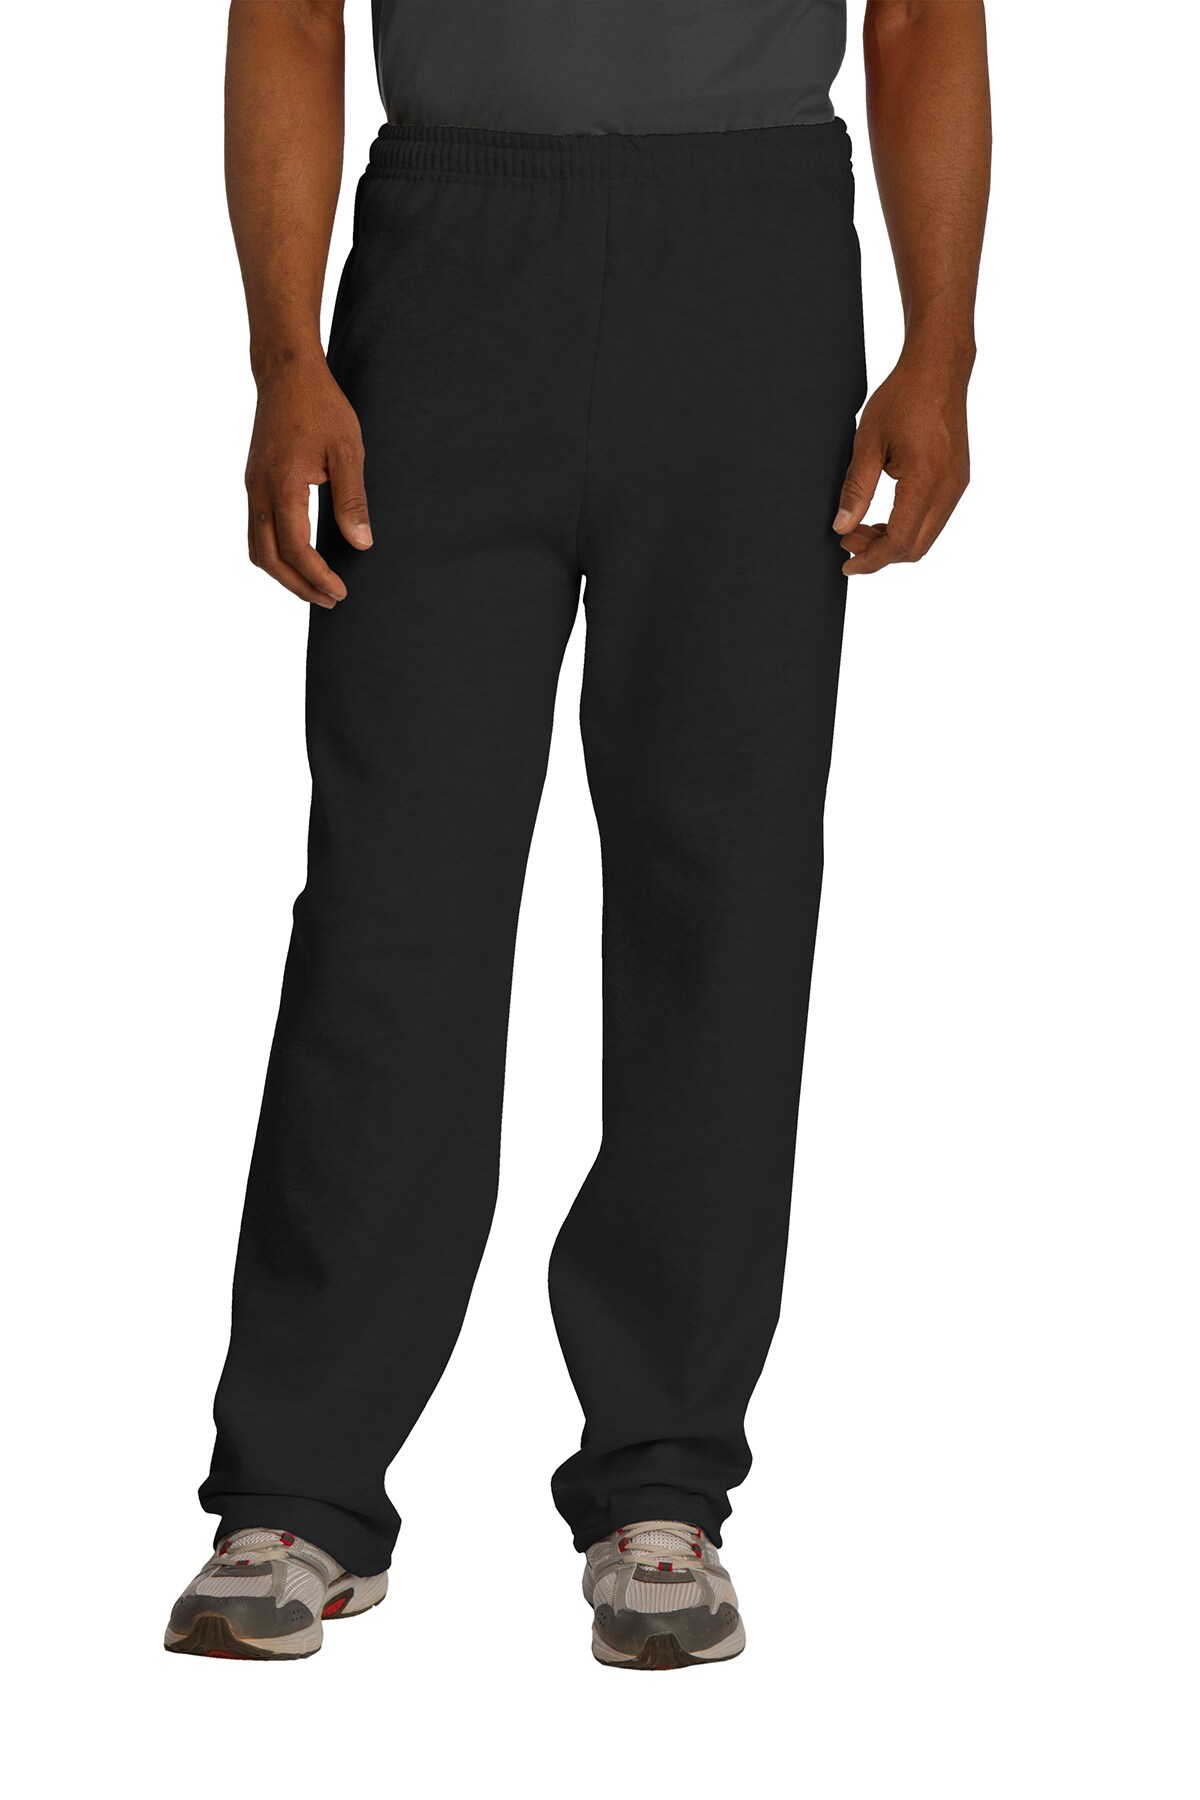 JERZEES&#xAE; Nublend Open Bottom Pant with Pockets